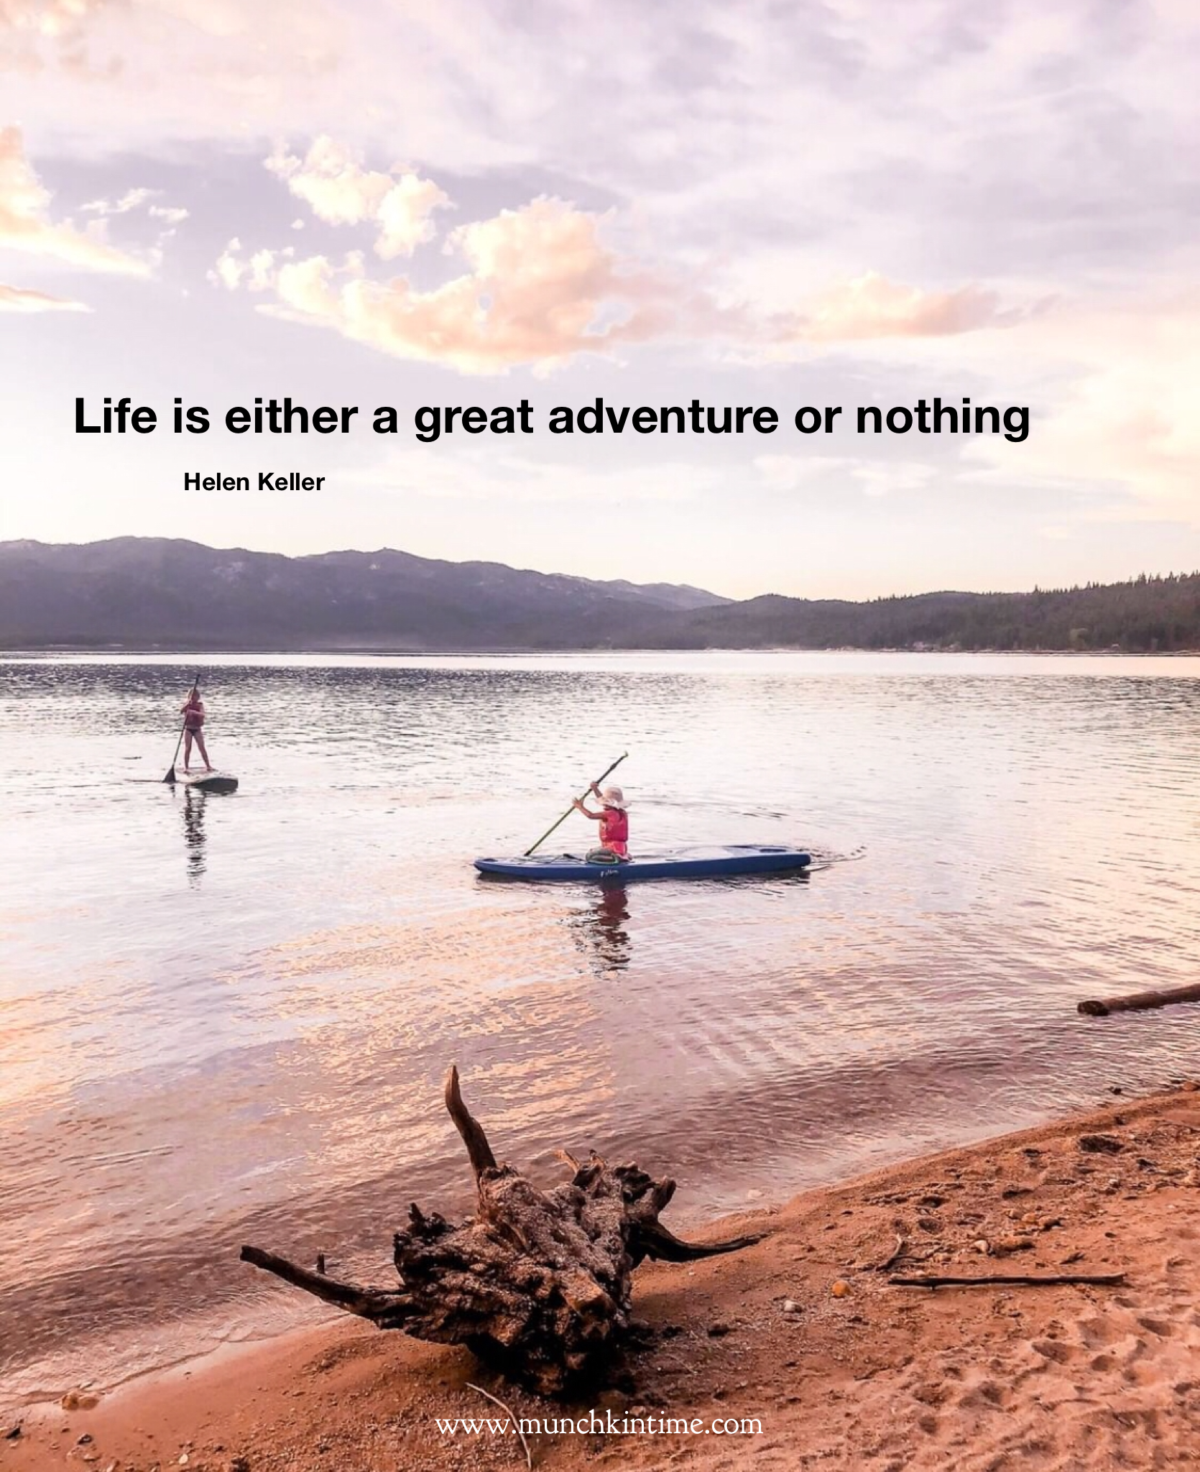 Helen Keller â€” 'Life is either a daring adventure or nothing at all.'